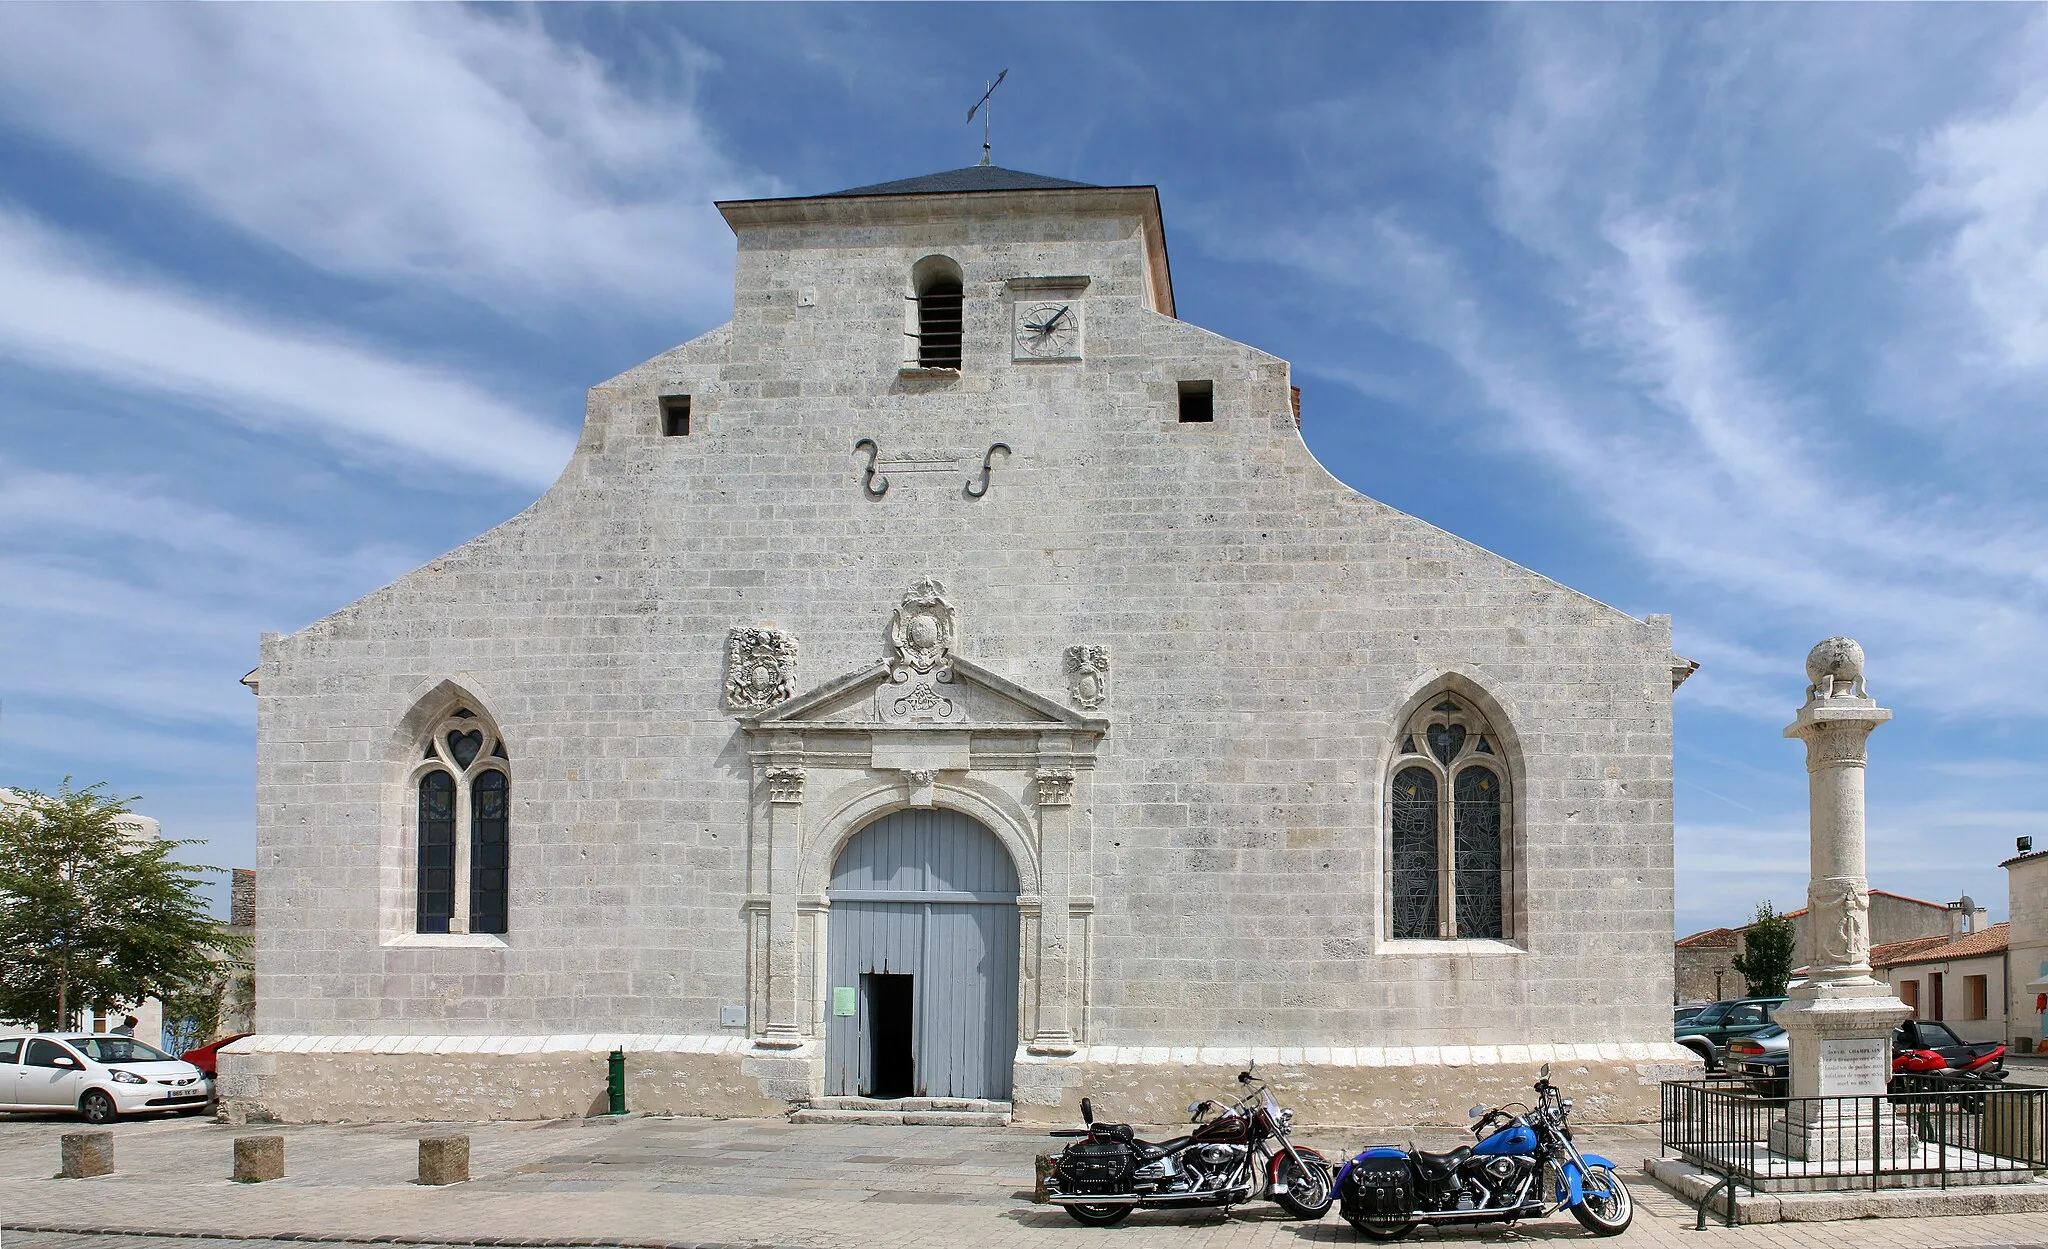 Photo showing: The church in the tiny town of Brouage, in Charente-Maritime (France), with the monument to Samuel de Champlain at its right. Samuel de Champlain is born in brouage, and prayed in this church between 1629 and 1632. The church was restaured thanks to funds from the canadian government and the city of Quebec.